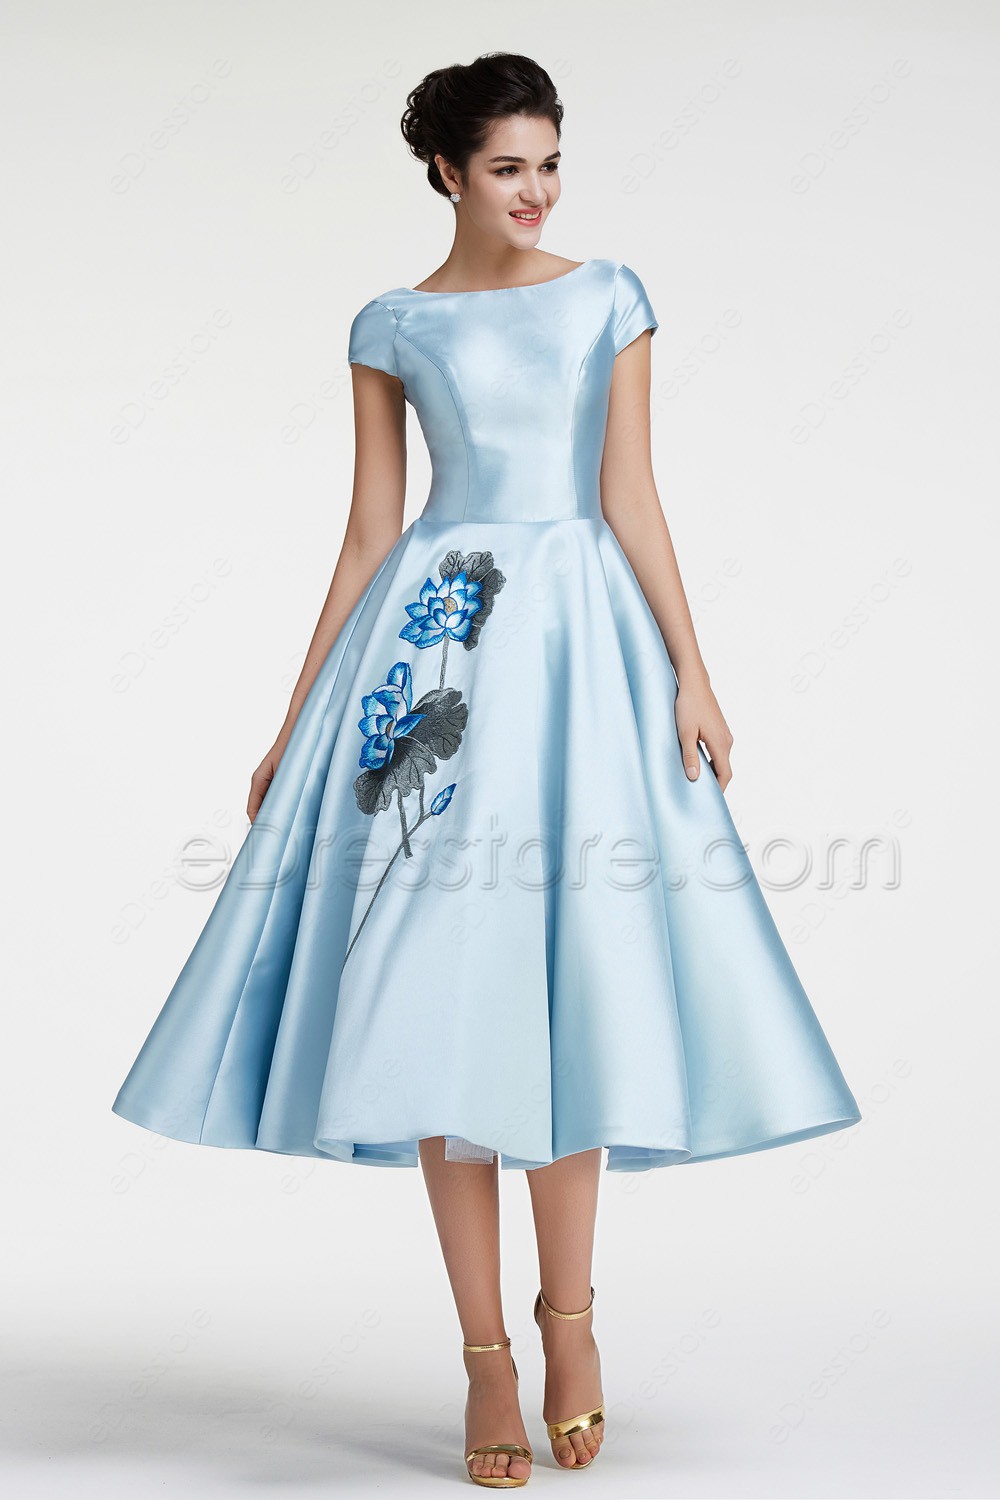 Modest Ball Gown Ice Blue Vintage Prom ...